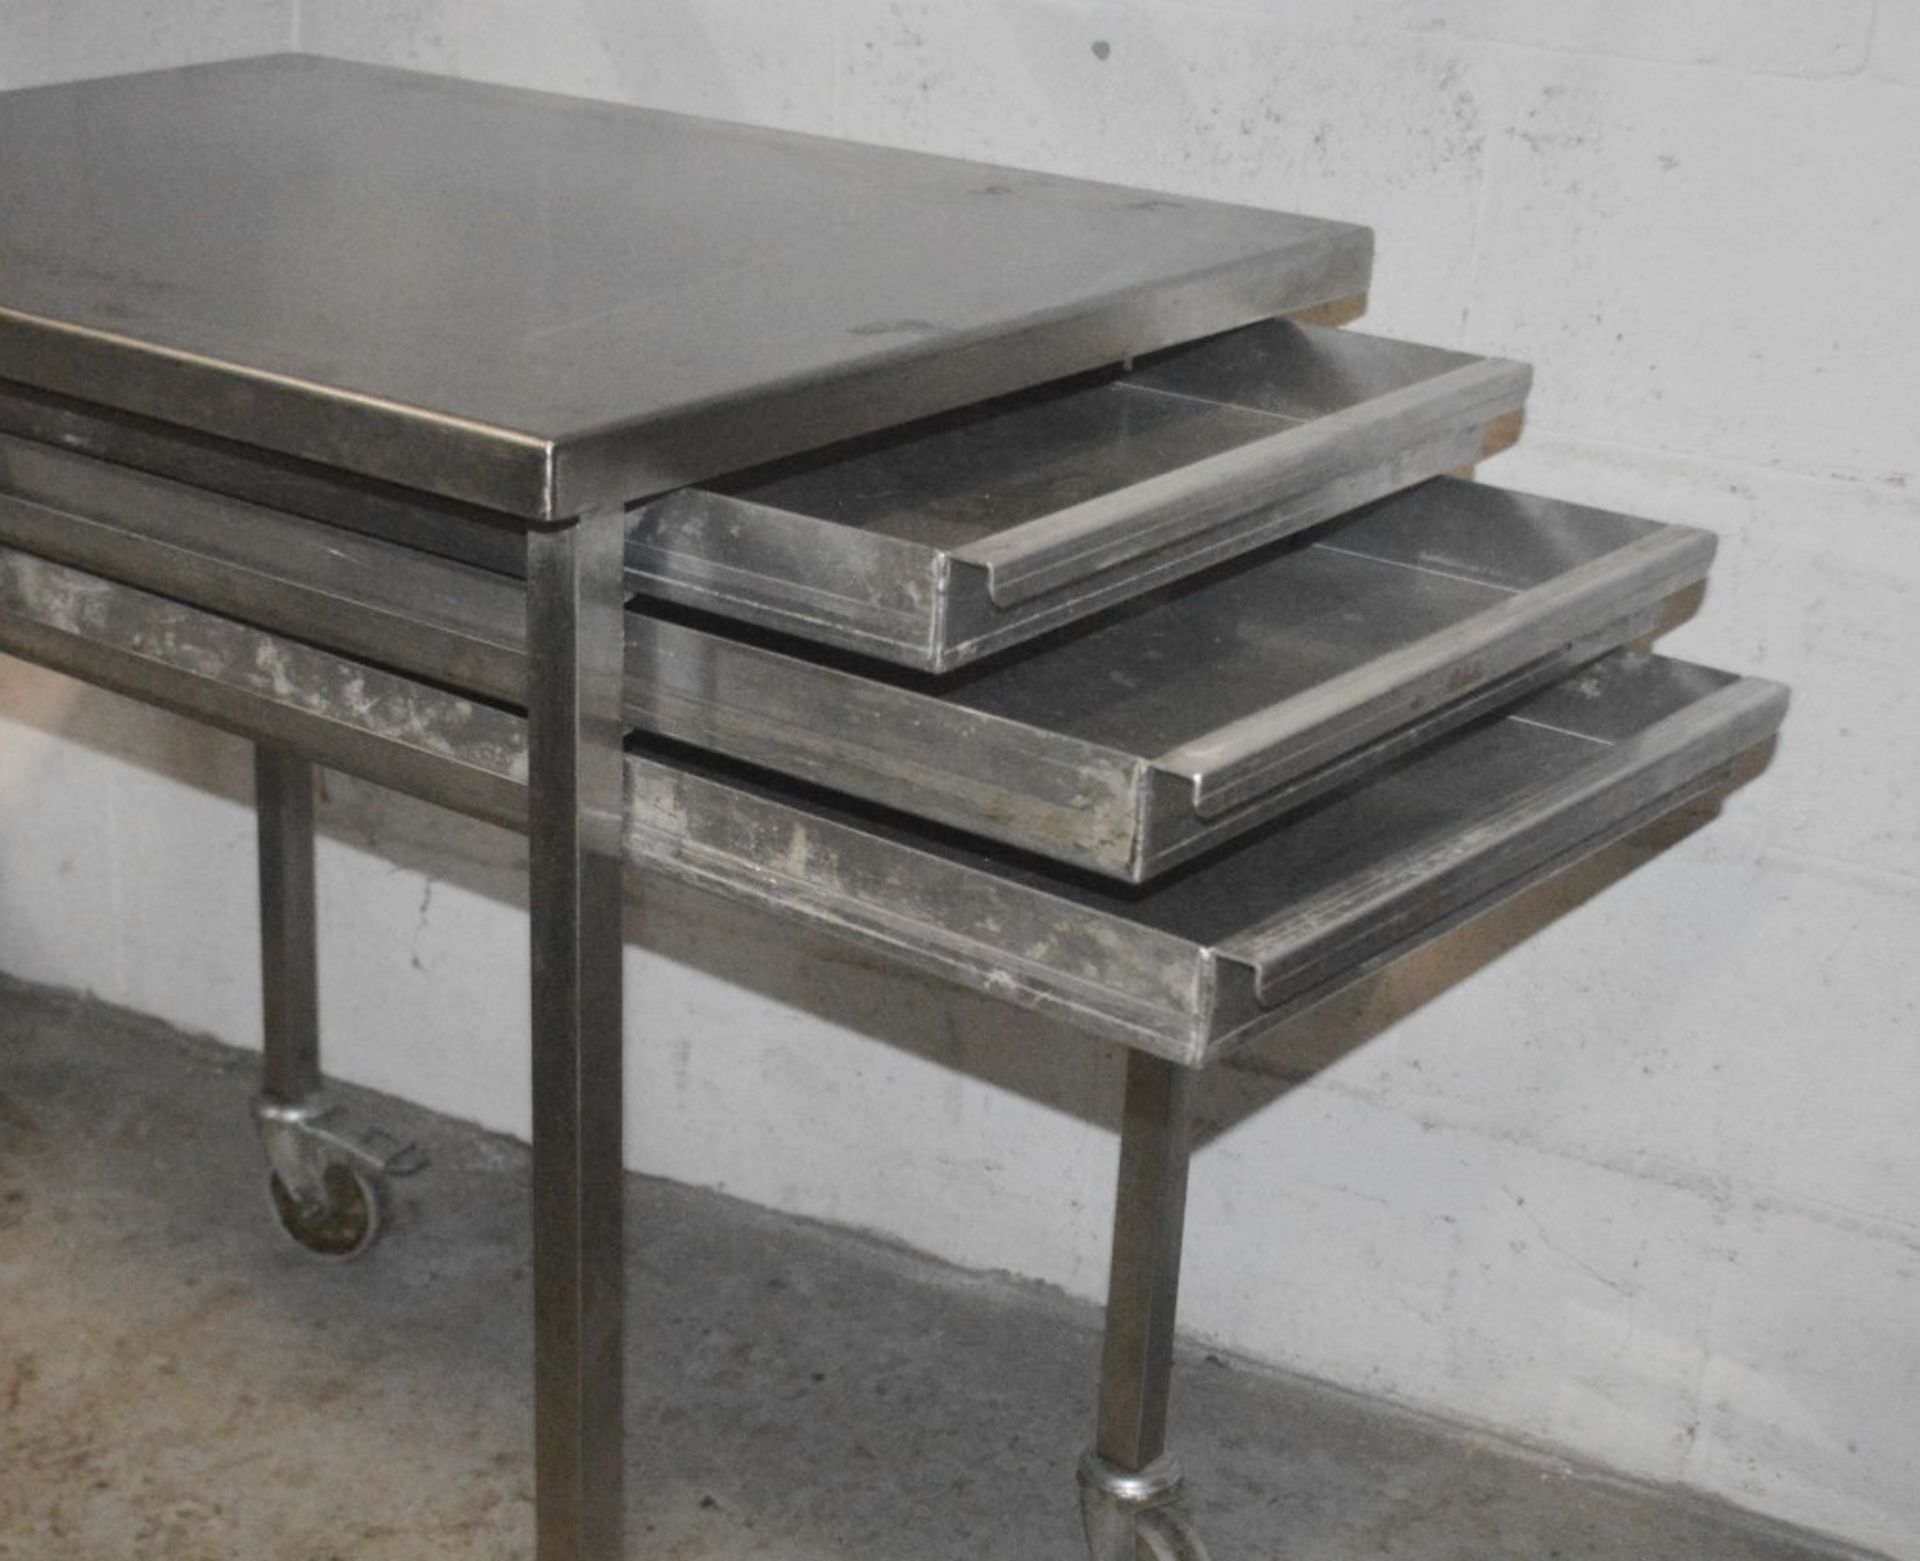 1 x Stainless Steel Commercial Kitchen 3-Drawer Prep Counter On Castors - Dimensions: H87 x W84 x - Image 4 of 4